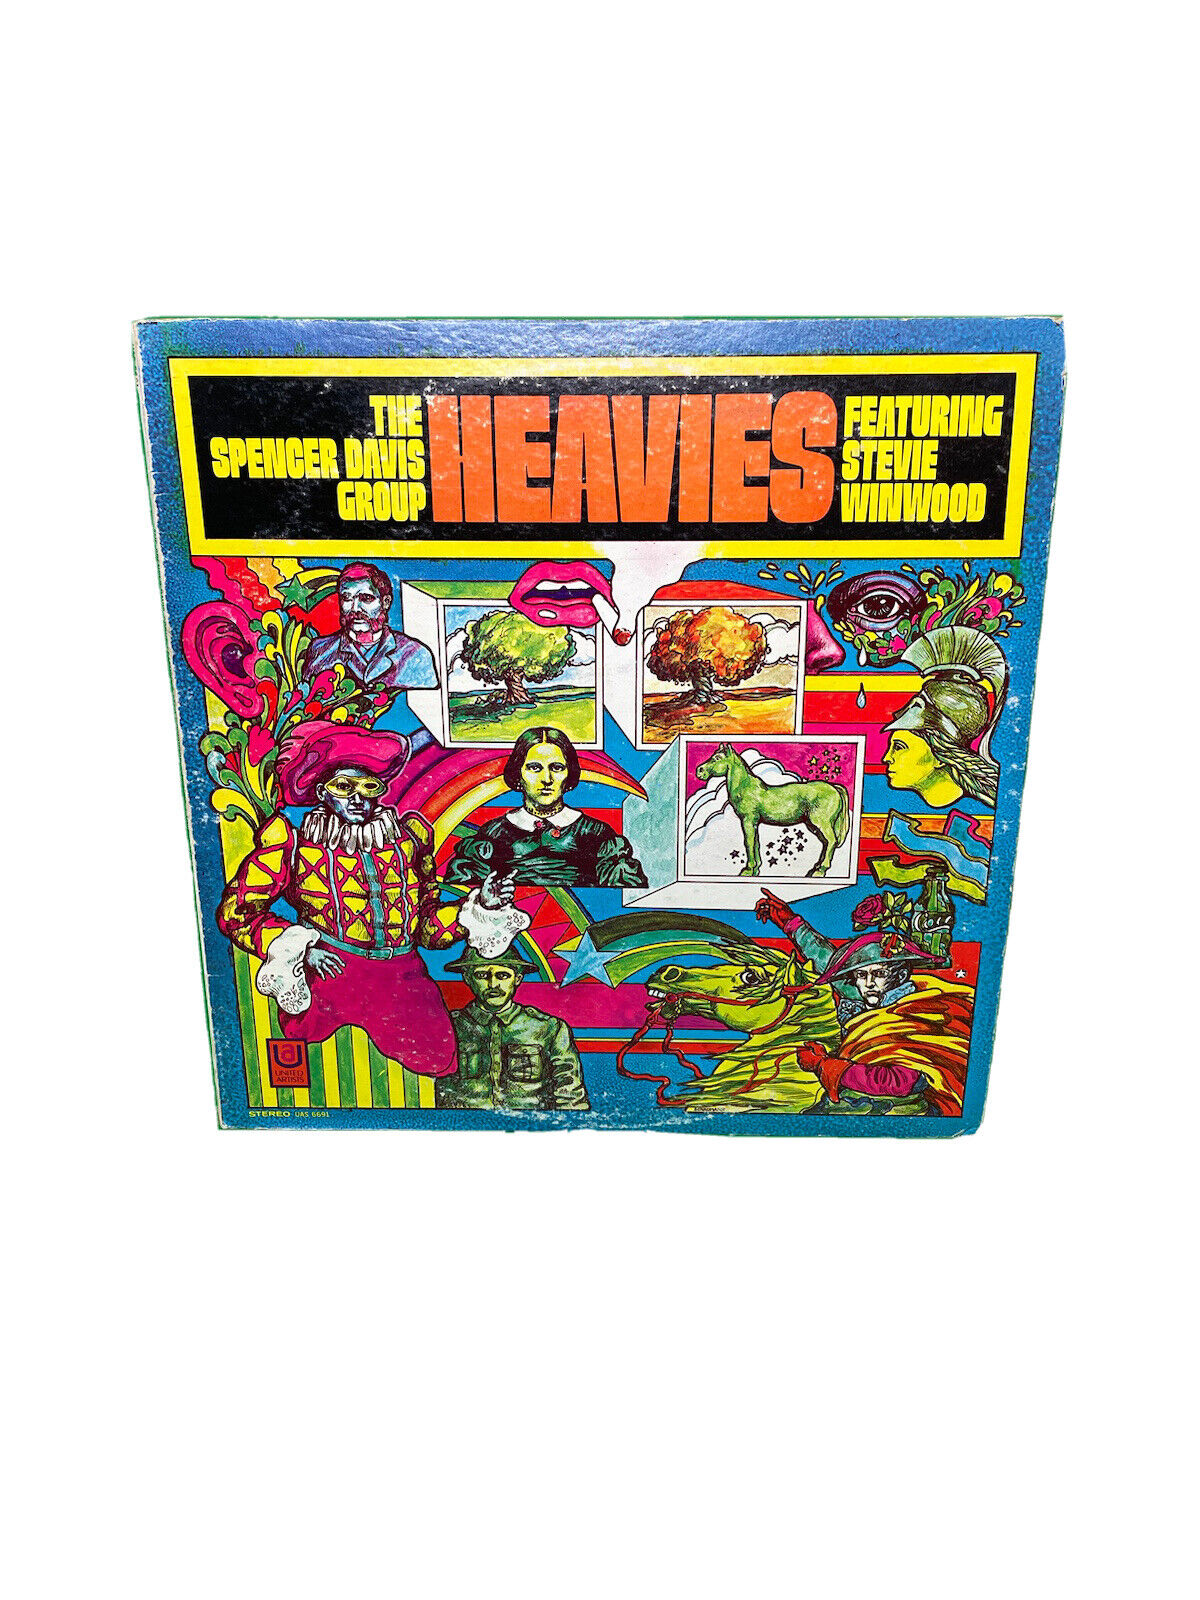 The Spencer Davis Group Heavies LP United Artists Records G+ VG